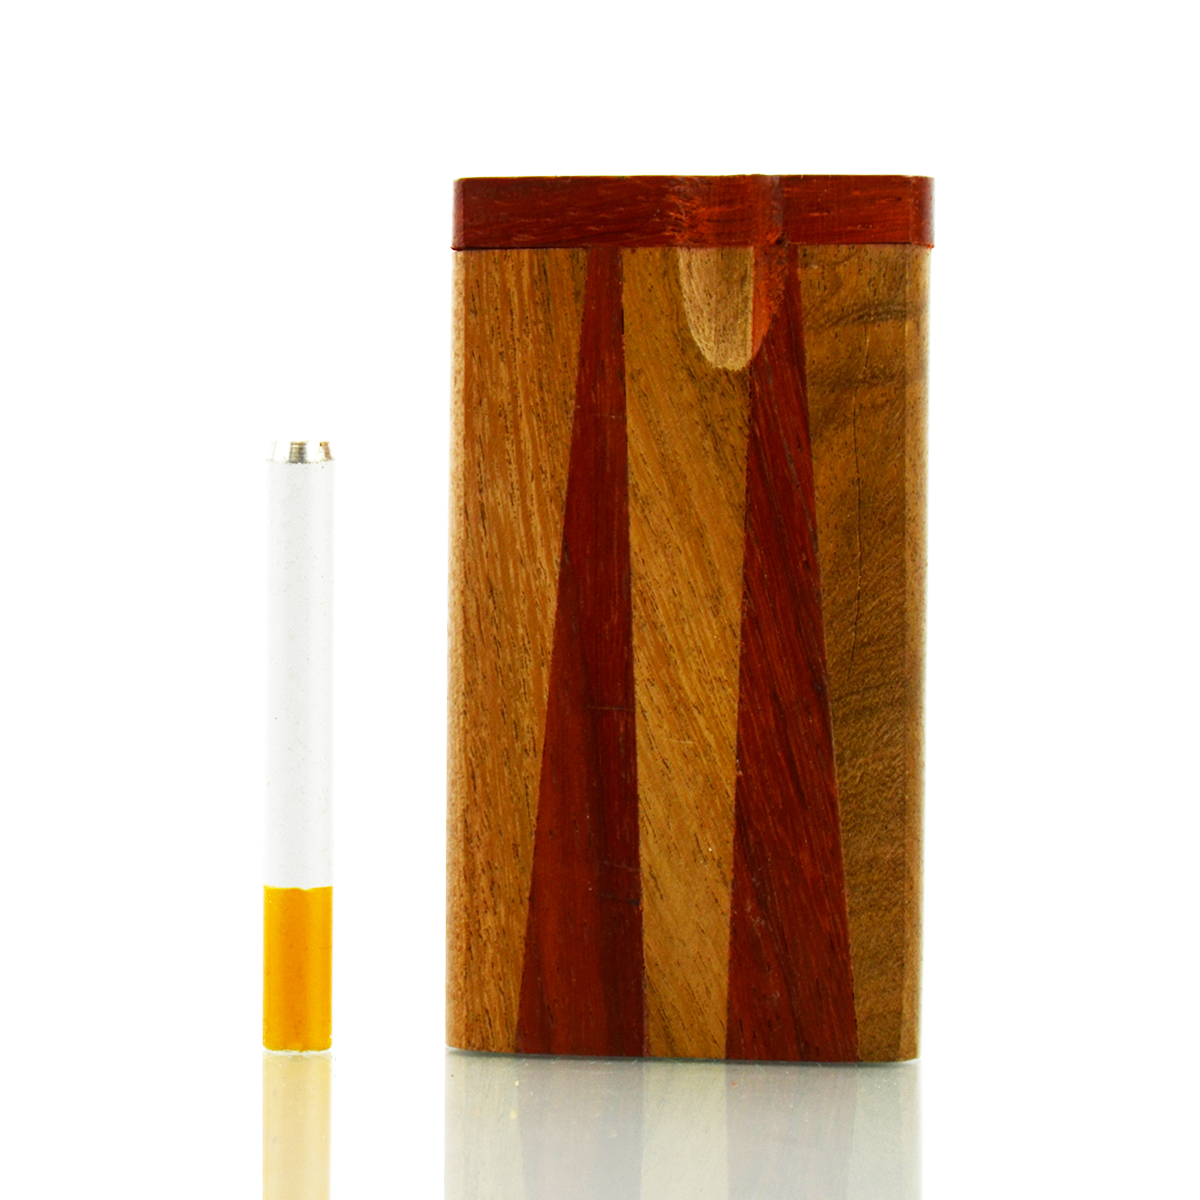 4'' Handmade Wooden Double Track Trio-Cut Design Dugout Art with 3'' Metal CIGARETTE